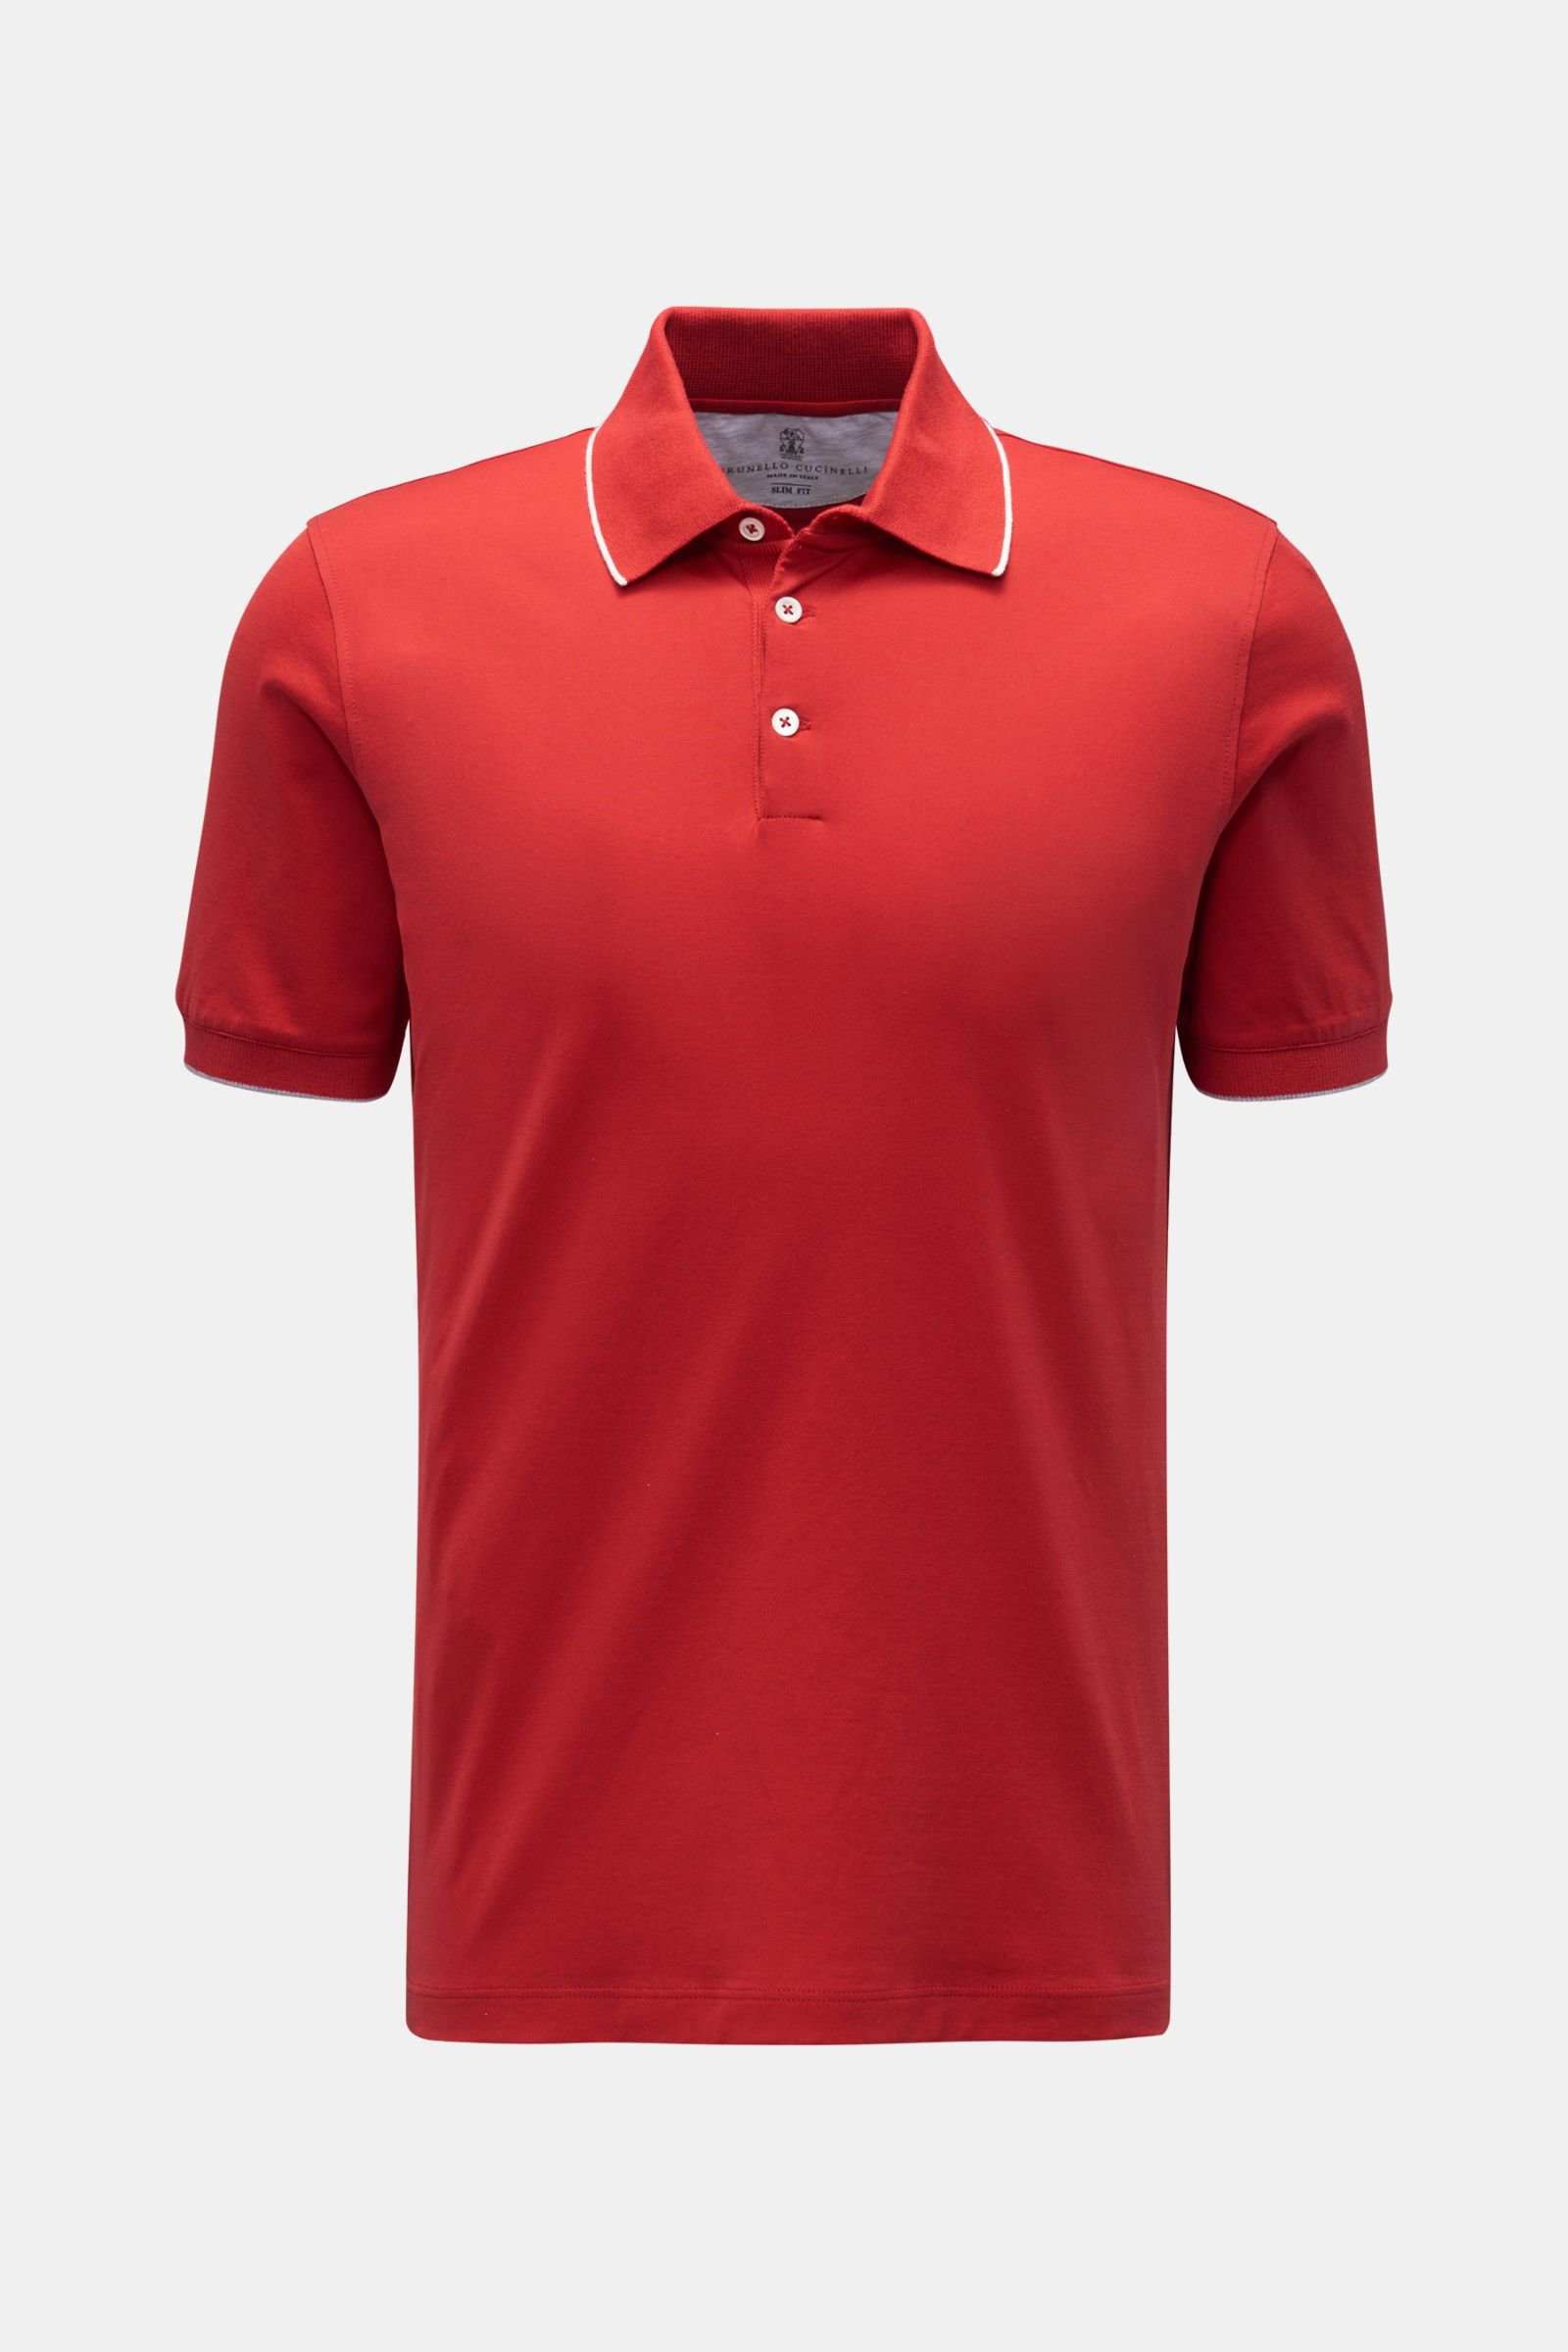 Jersey polo shirt red